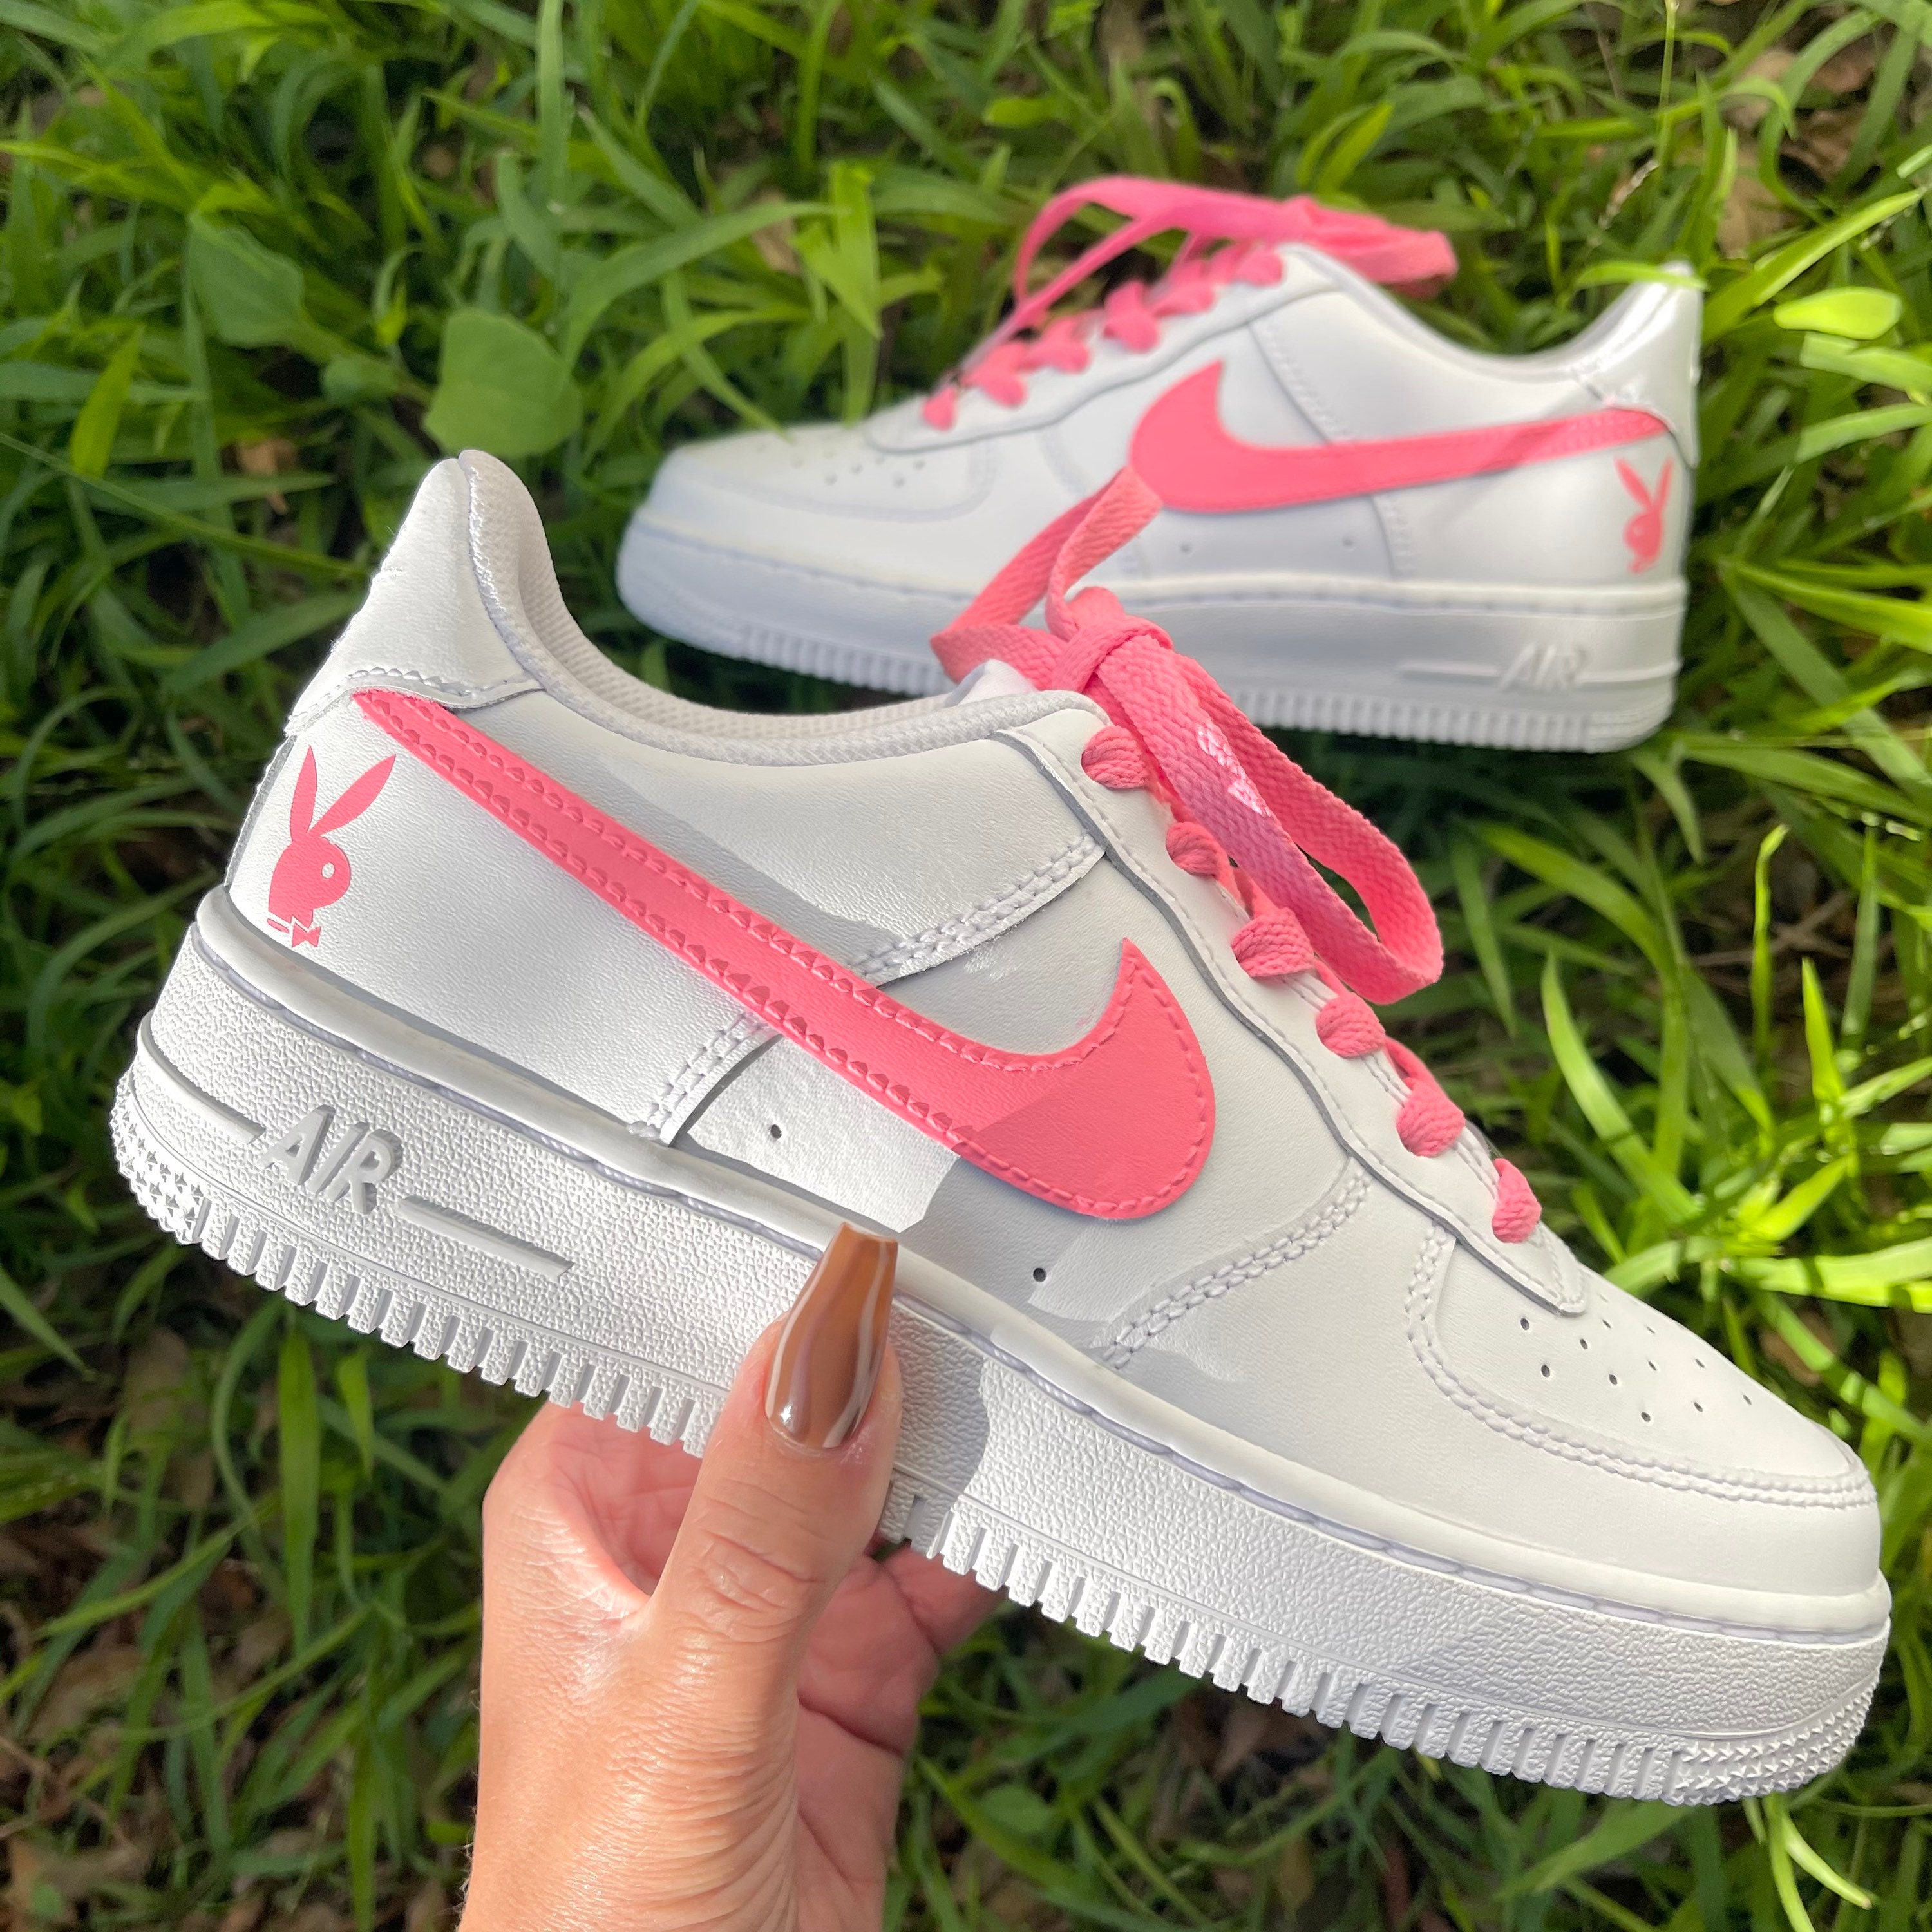 white and pink air force 1 size 5